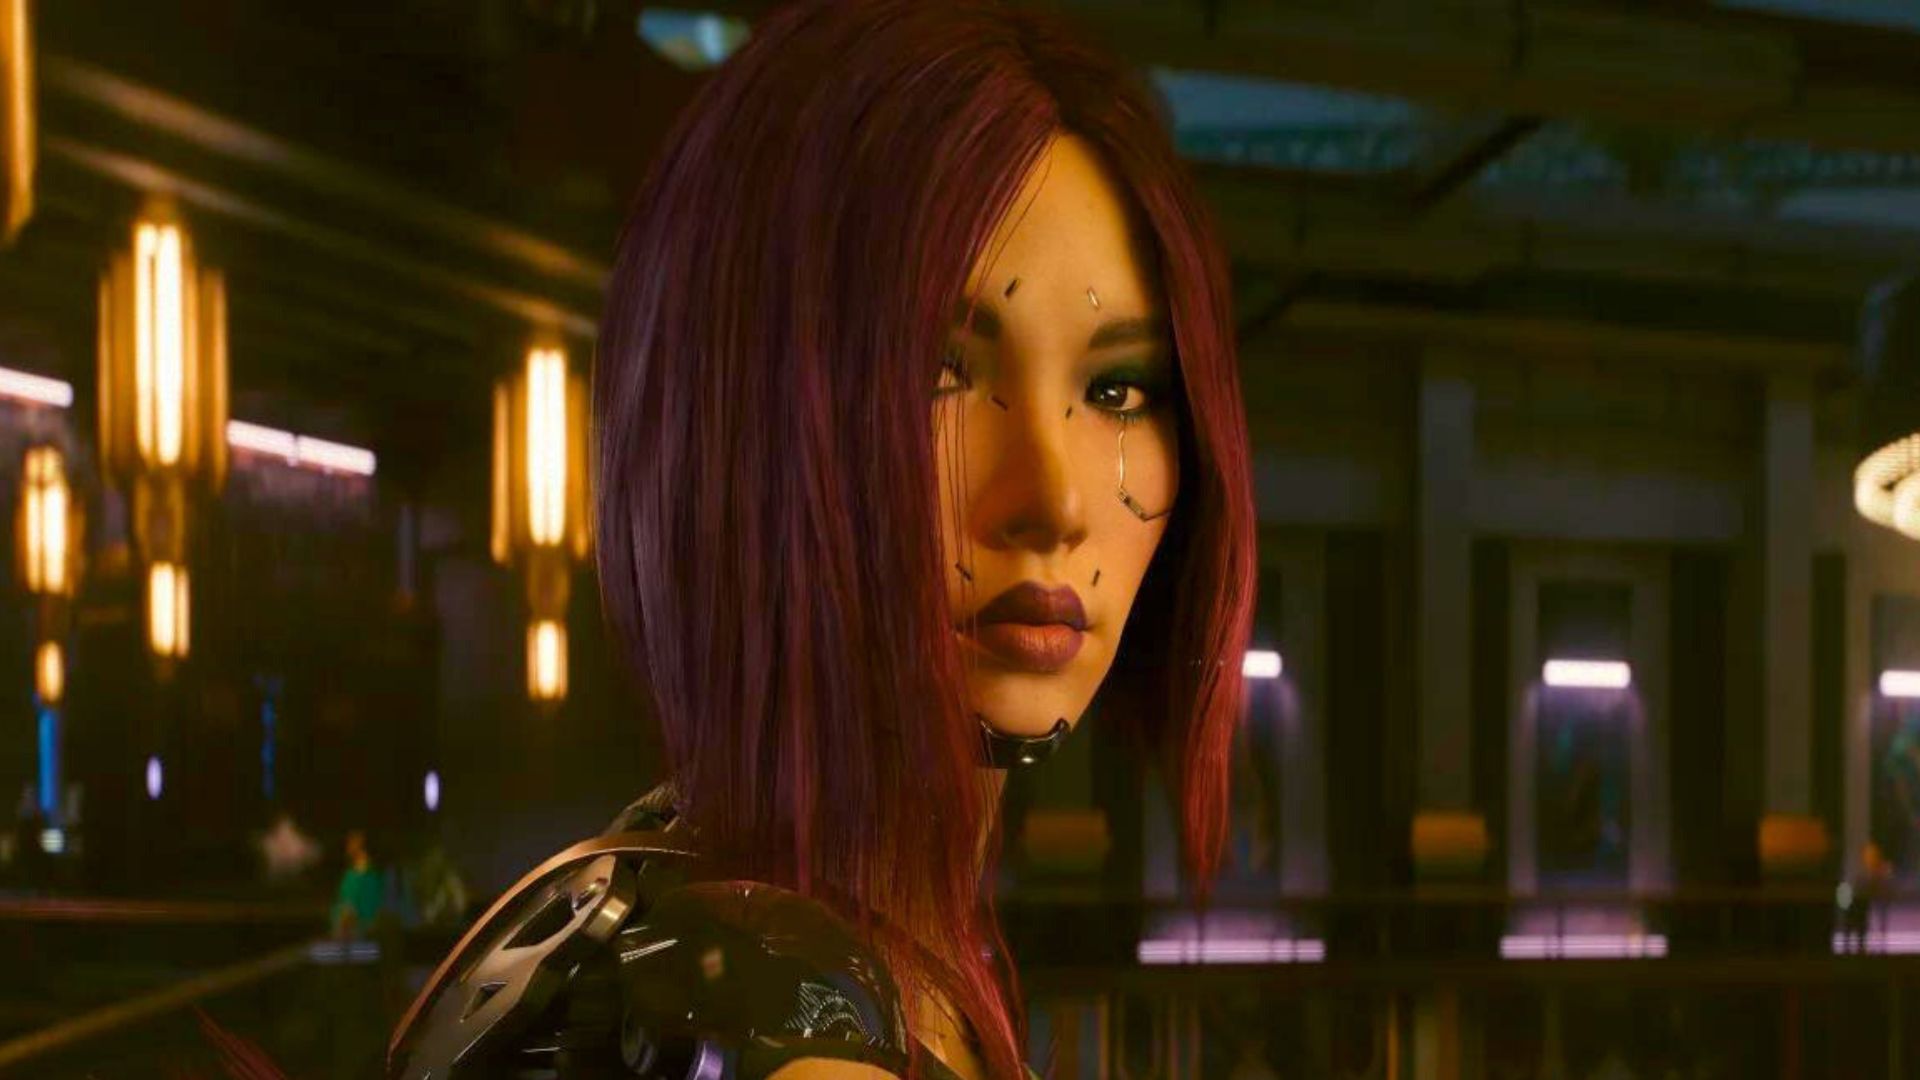 Cyberpunk 2077 director open to small content updates in the future